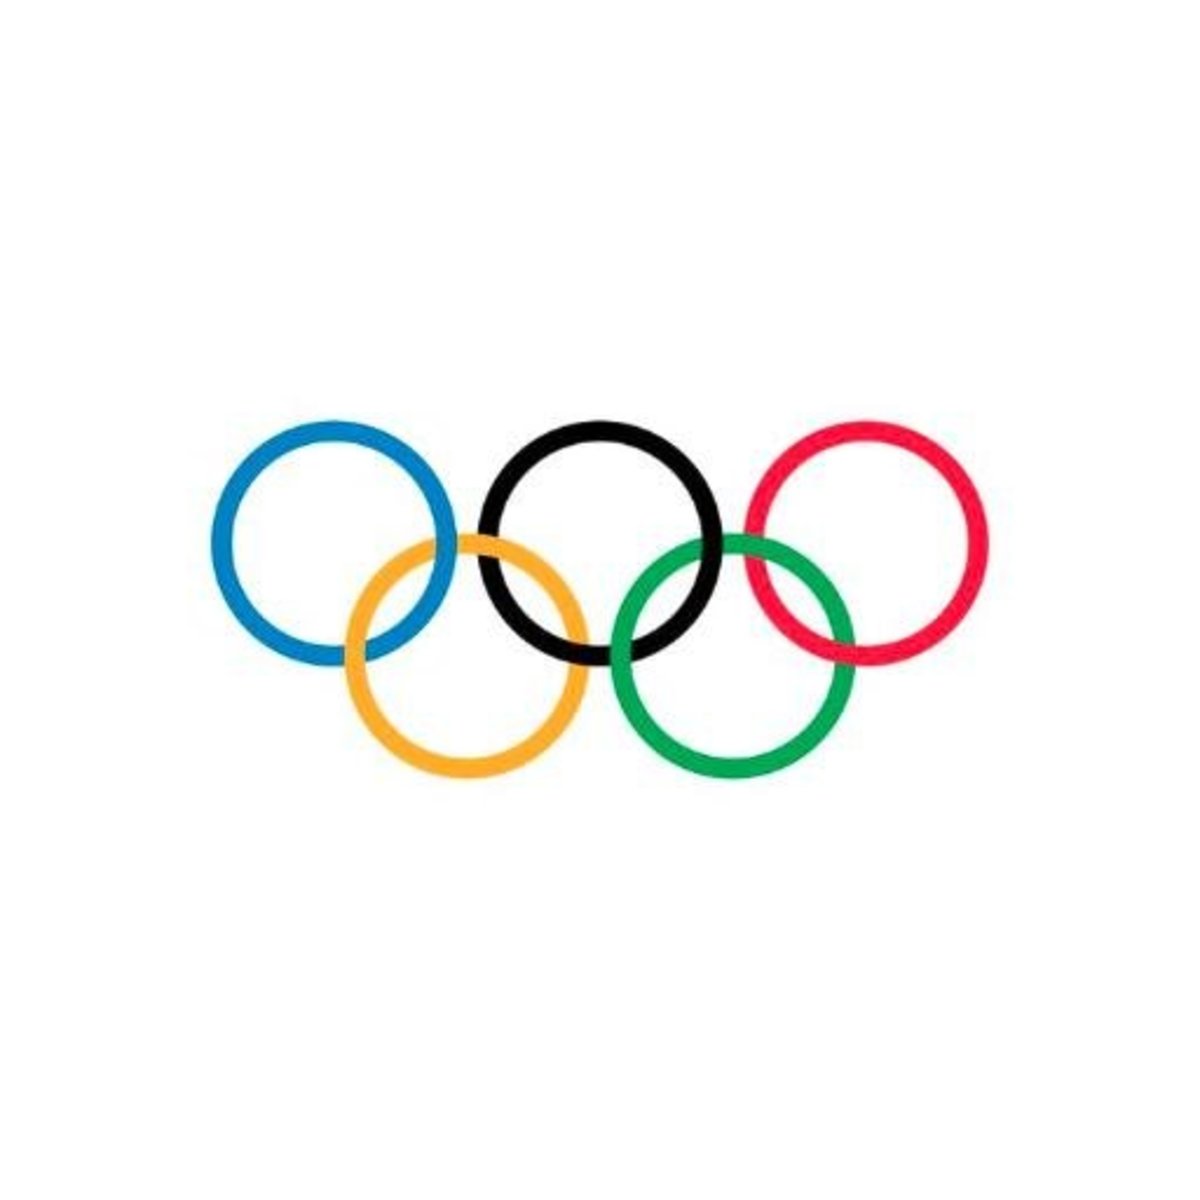 A picture of the Olympics Rings.